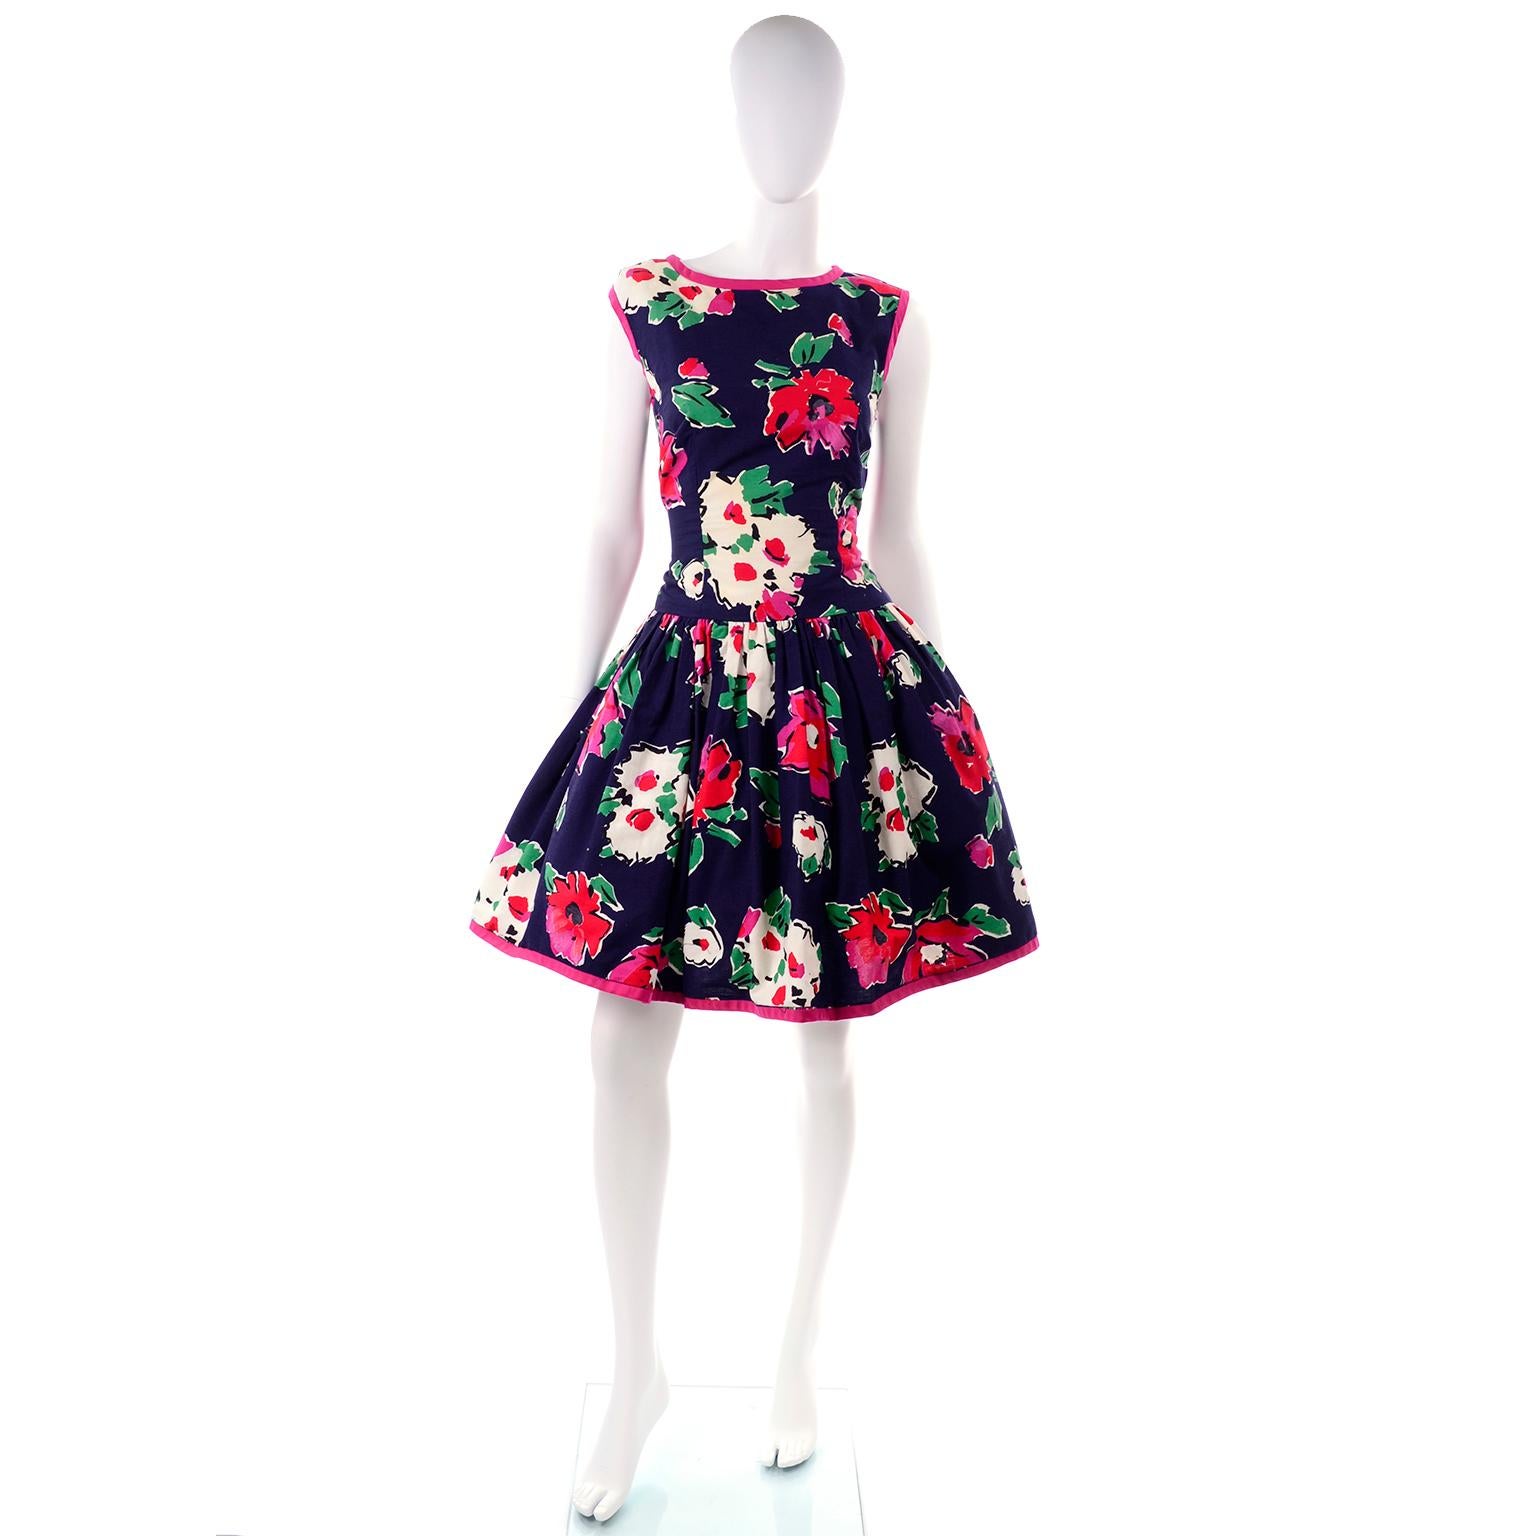 This is a fun 1980s Victor Costa vintage floral dress with bright pink trim in a navy blue cotton with red, white, cream and pink flowers.  The dress has a great open back with a pretty bow at the waist and it closes with a back zipper.  There is a